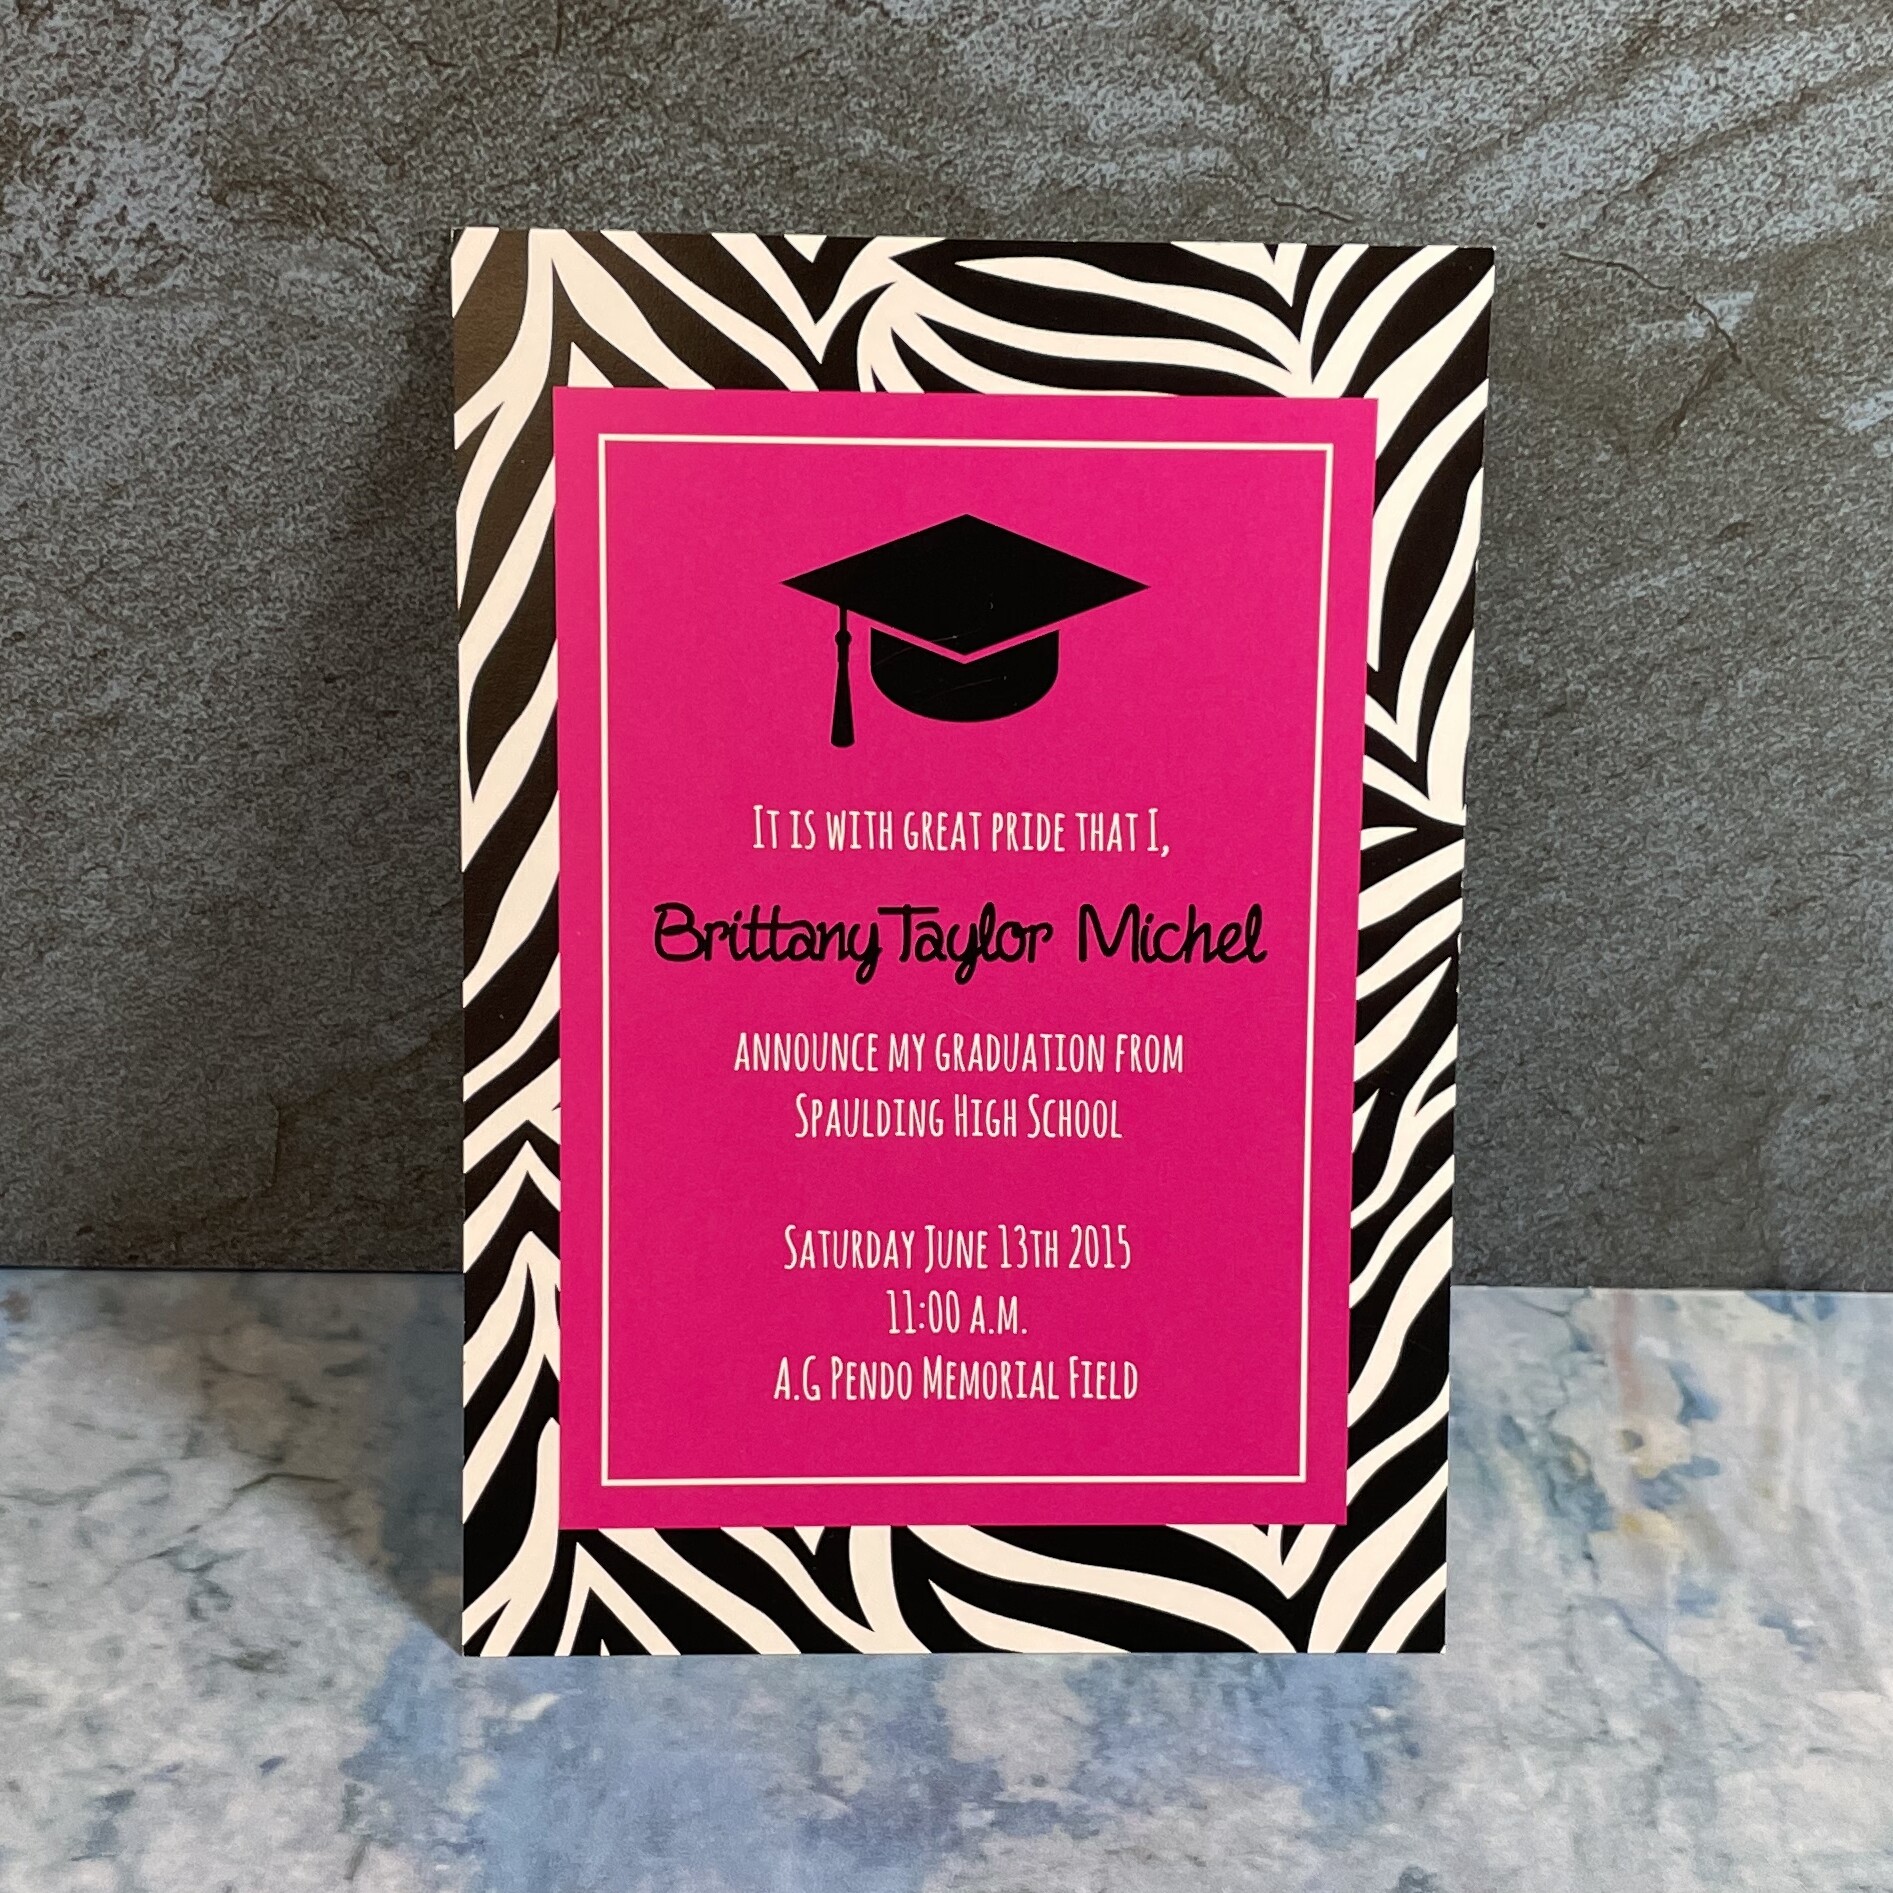 Graduation Announcement for Brittany